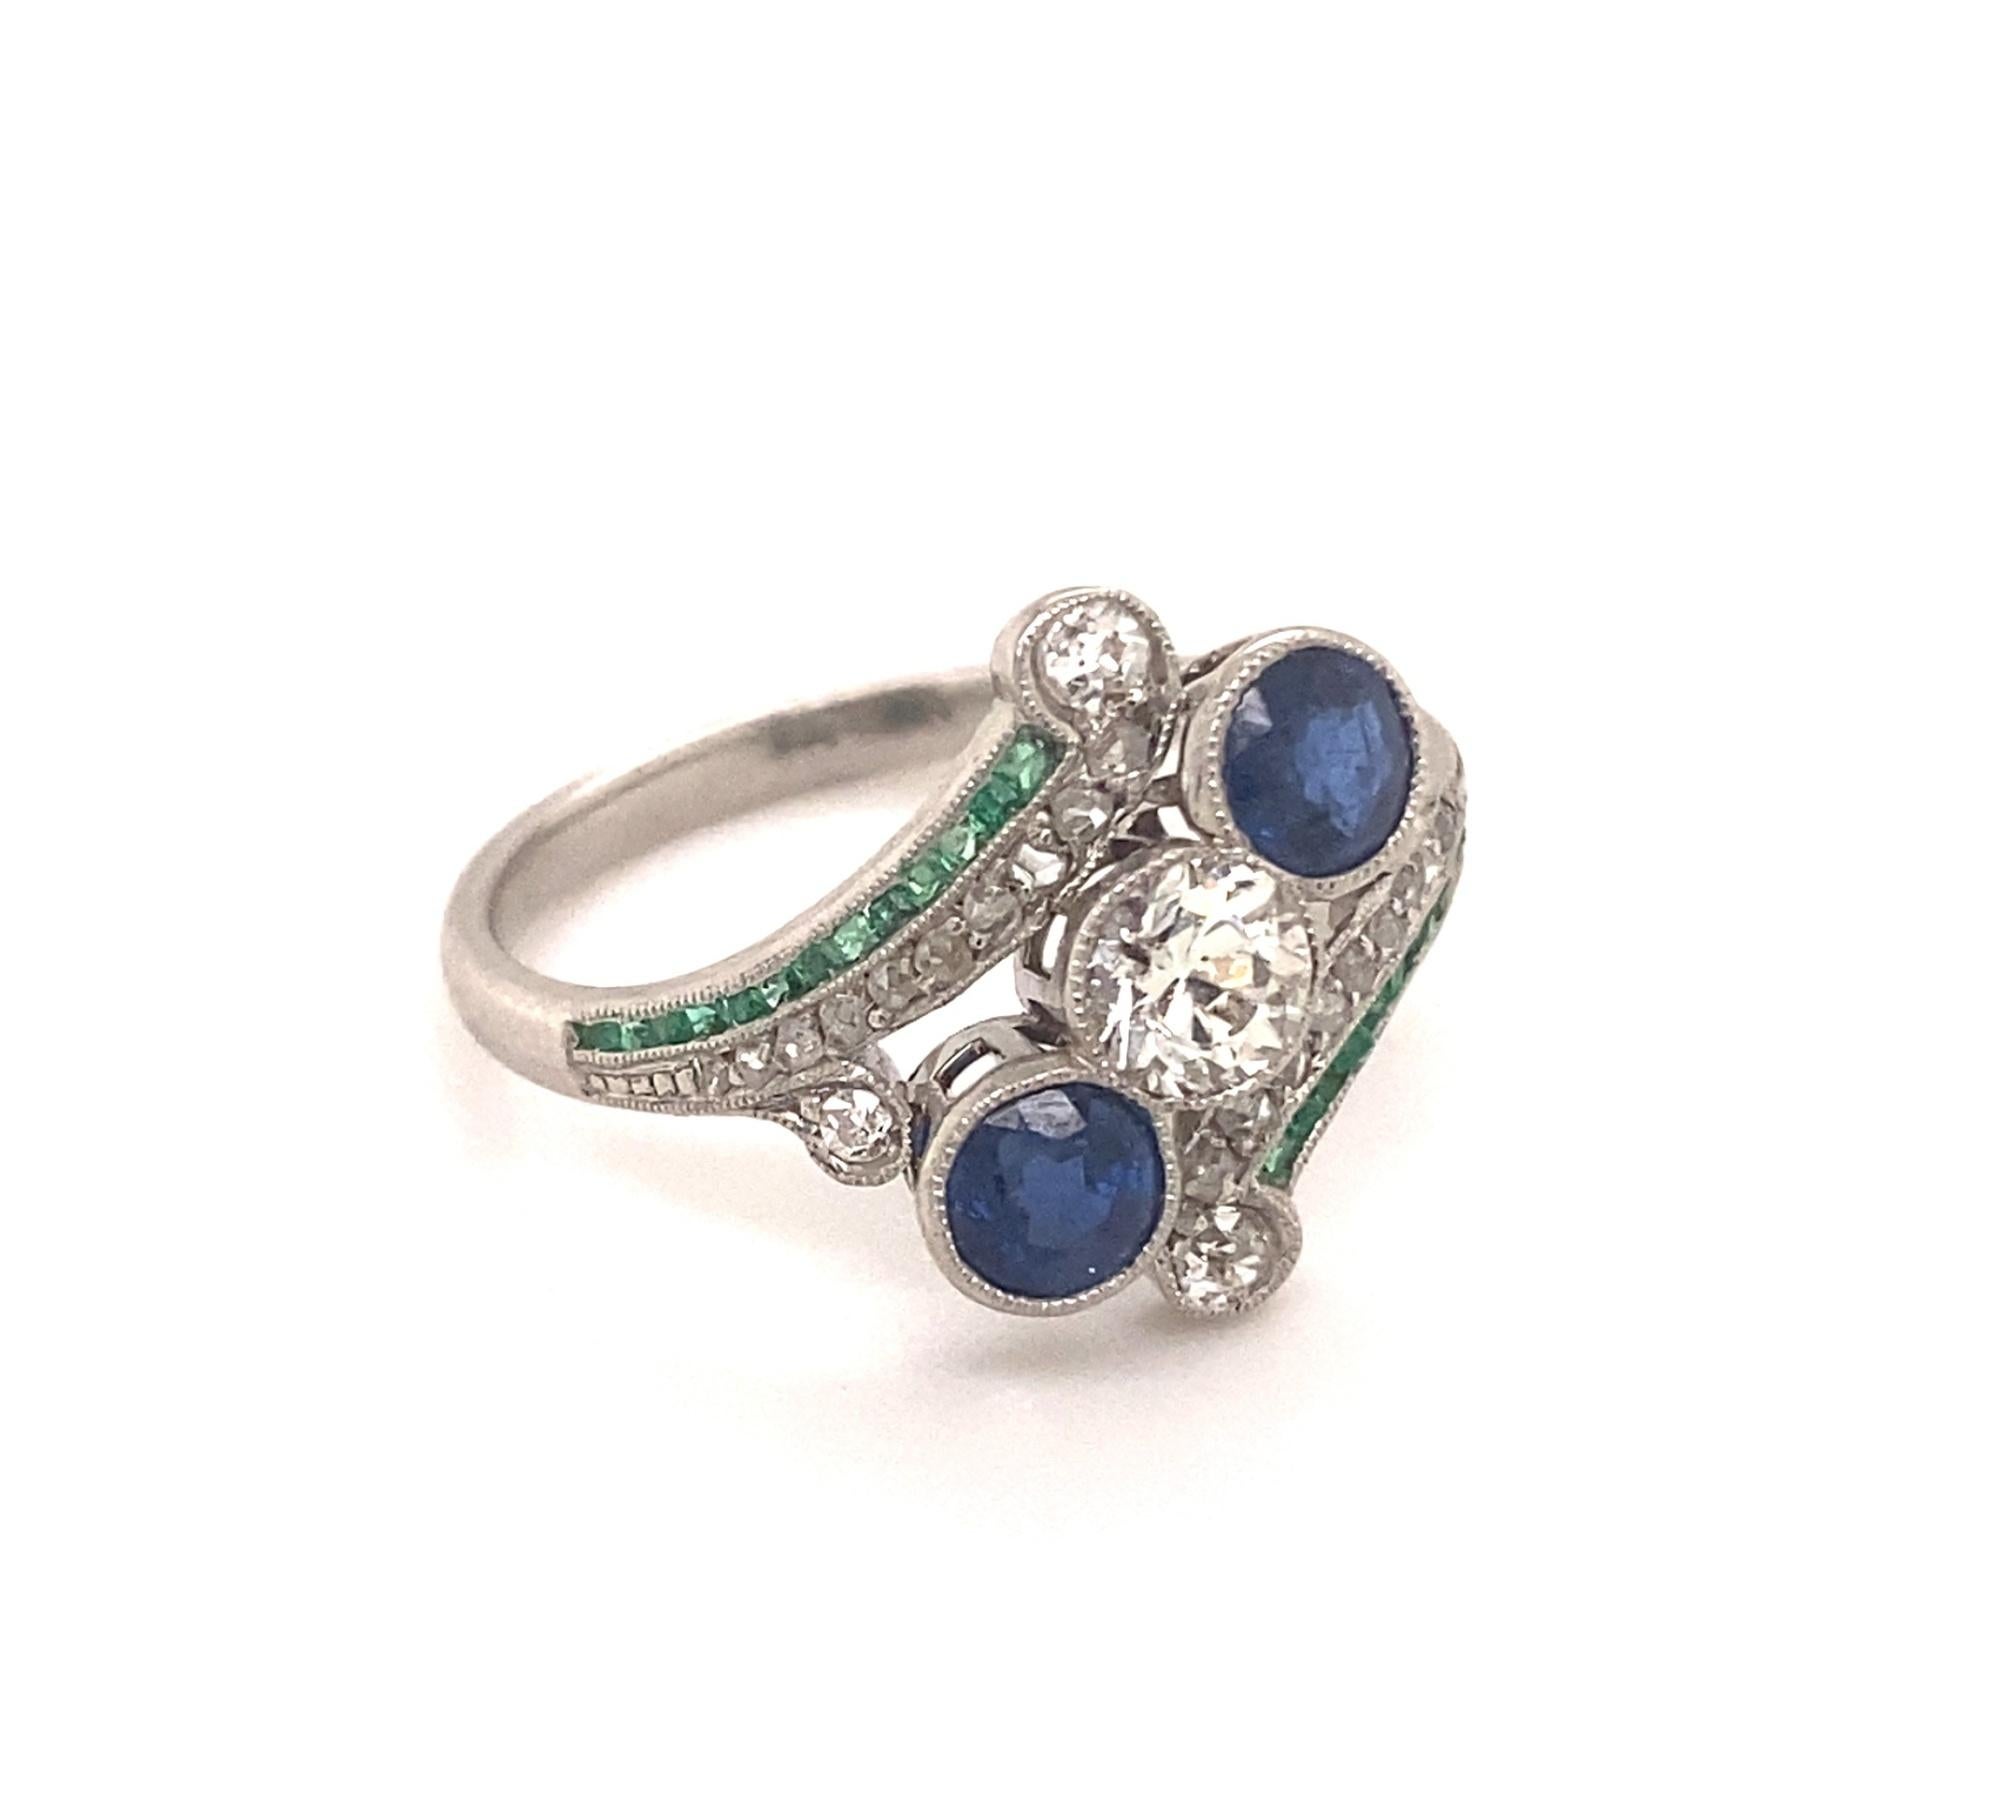 Art Deco Diamonds Emeralds Sapphires Platinum Ring In Excellent Condition For Sale In Woodland Hills, CA